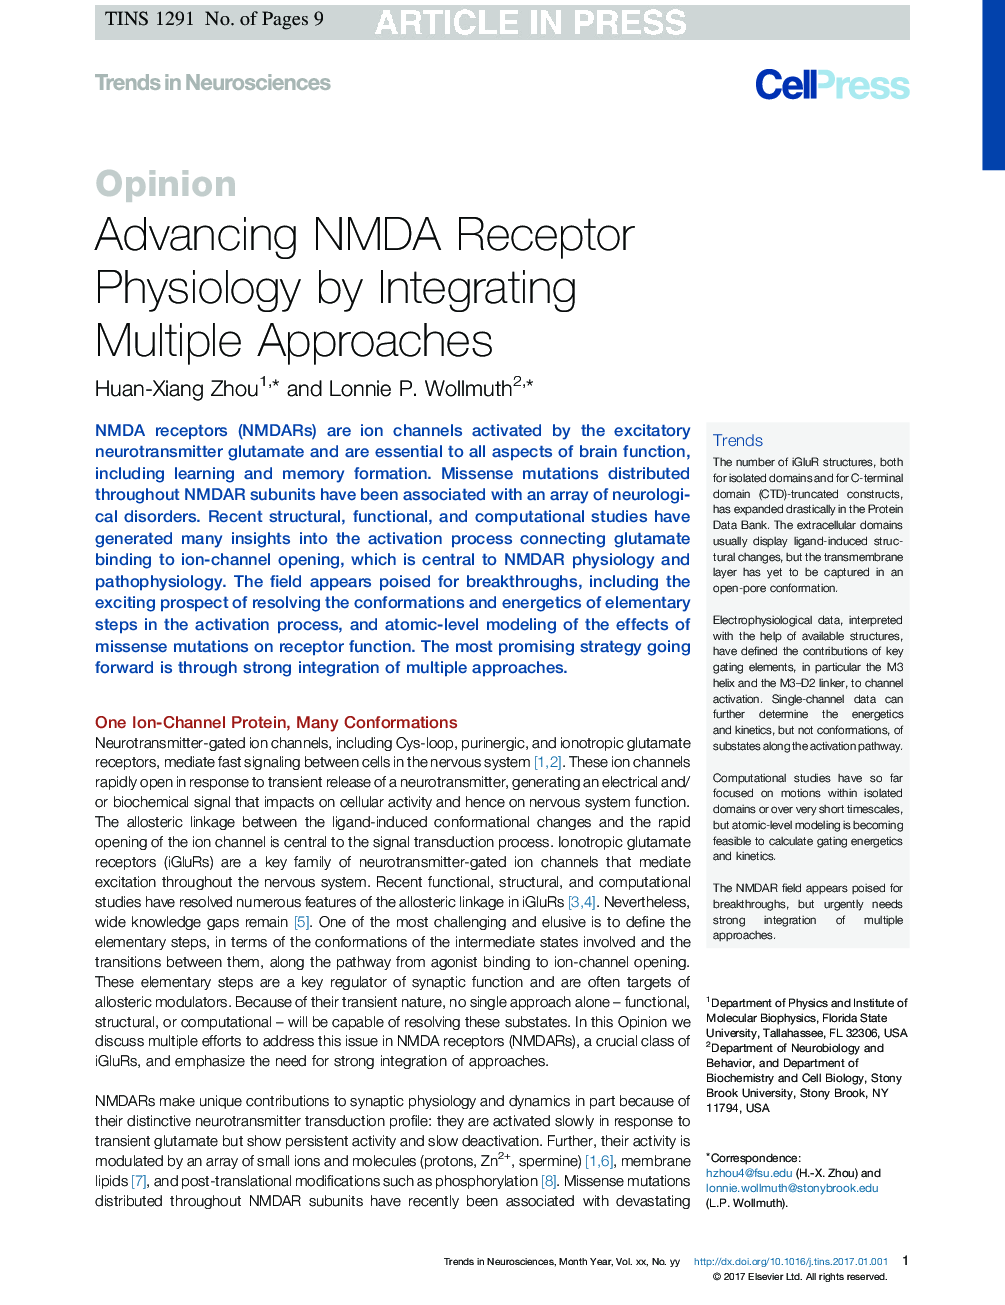 Advancing NMDA Receptor Physiology by Integrating Multiple Approaches